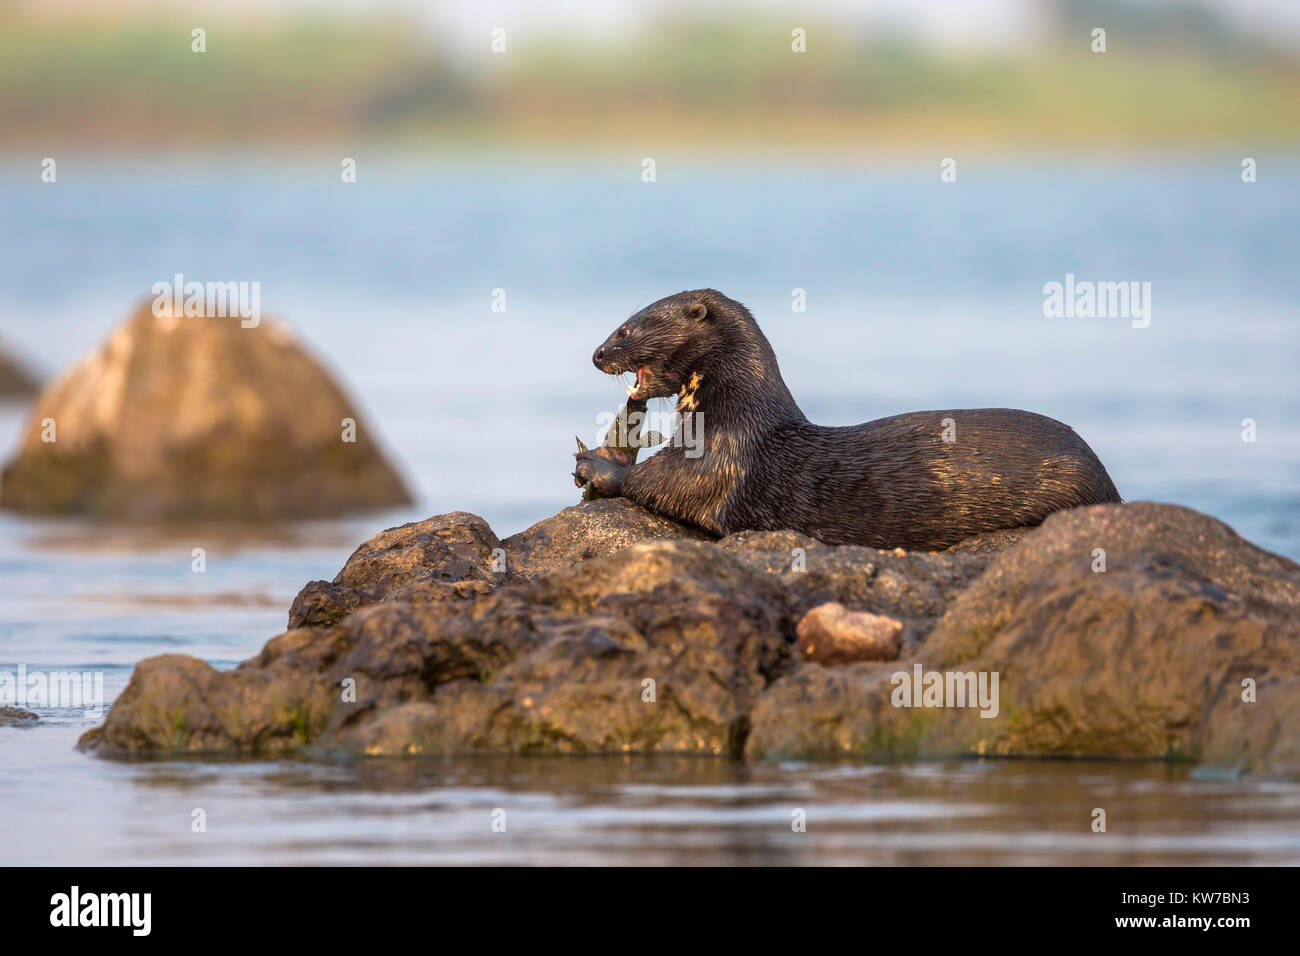 Spotted necked otter (Hydrictis maculicollis) eating leopard squeaker fish (Synodontis leopardinus), Chobe River, Botswana, Africa, September 2017 Stock Photo